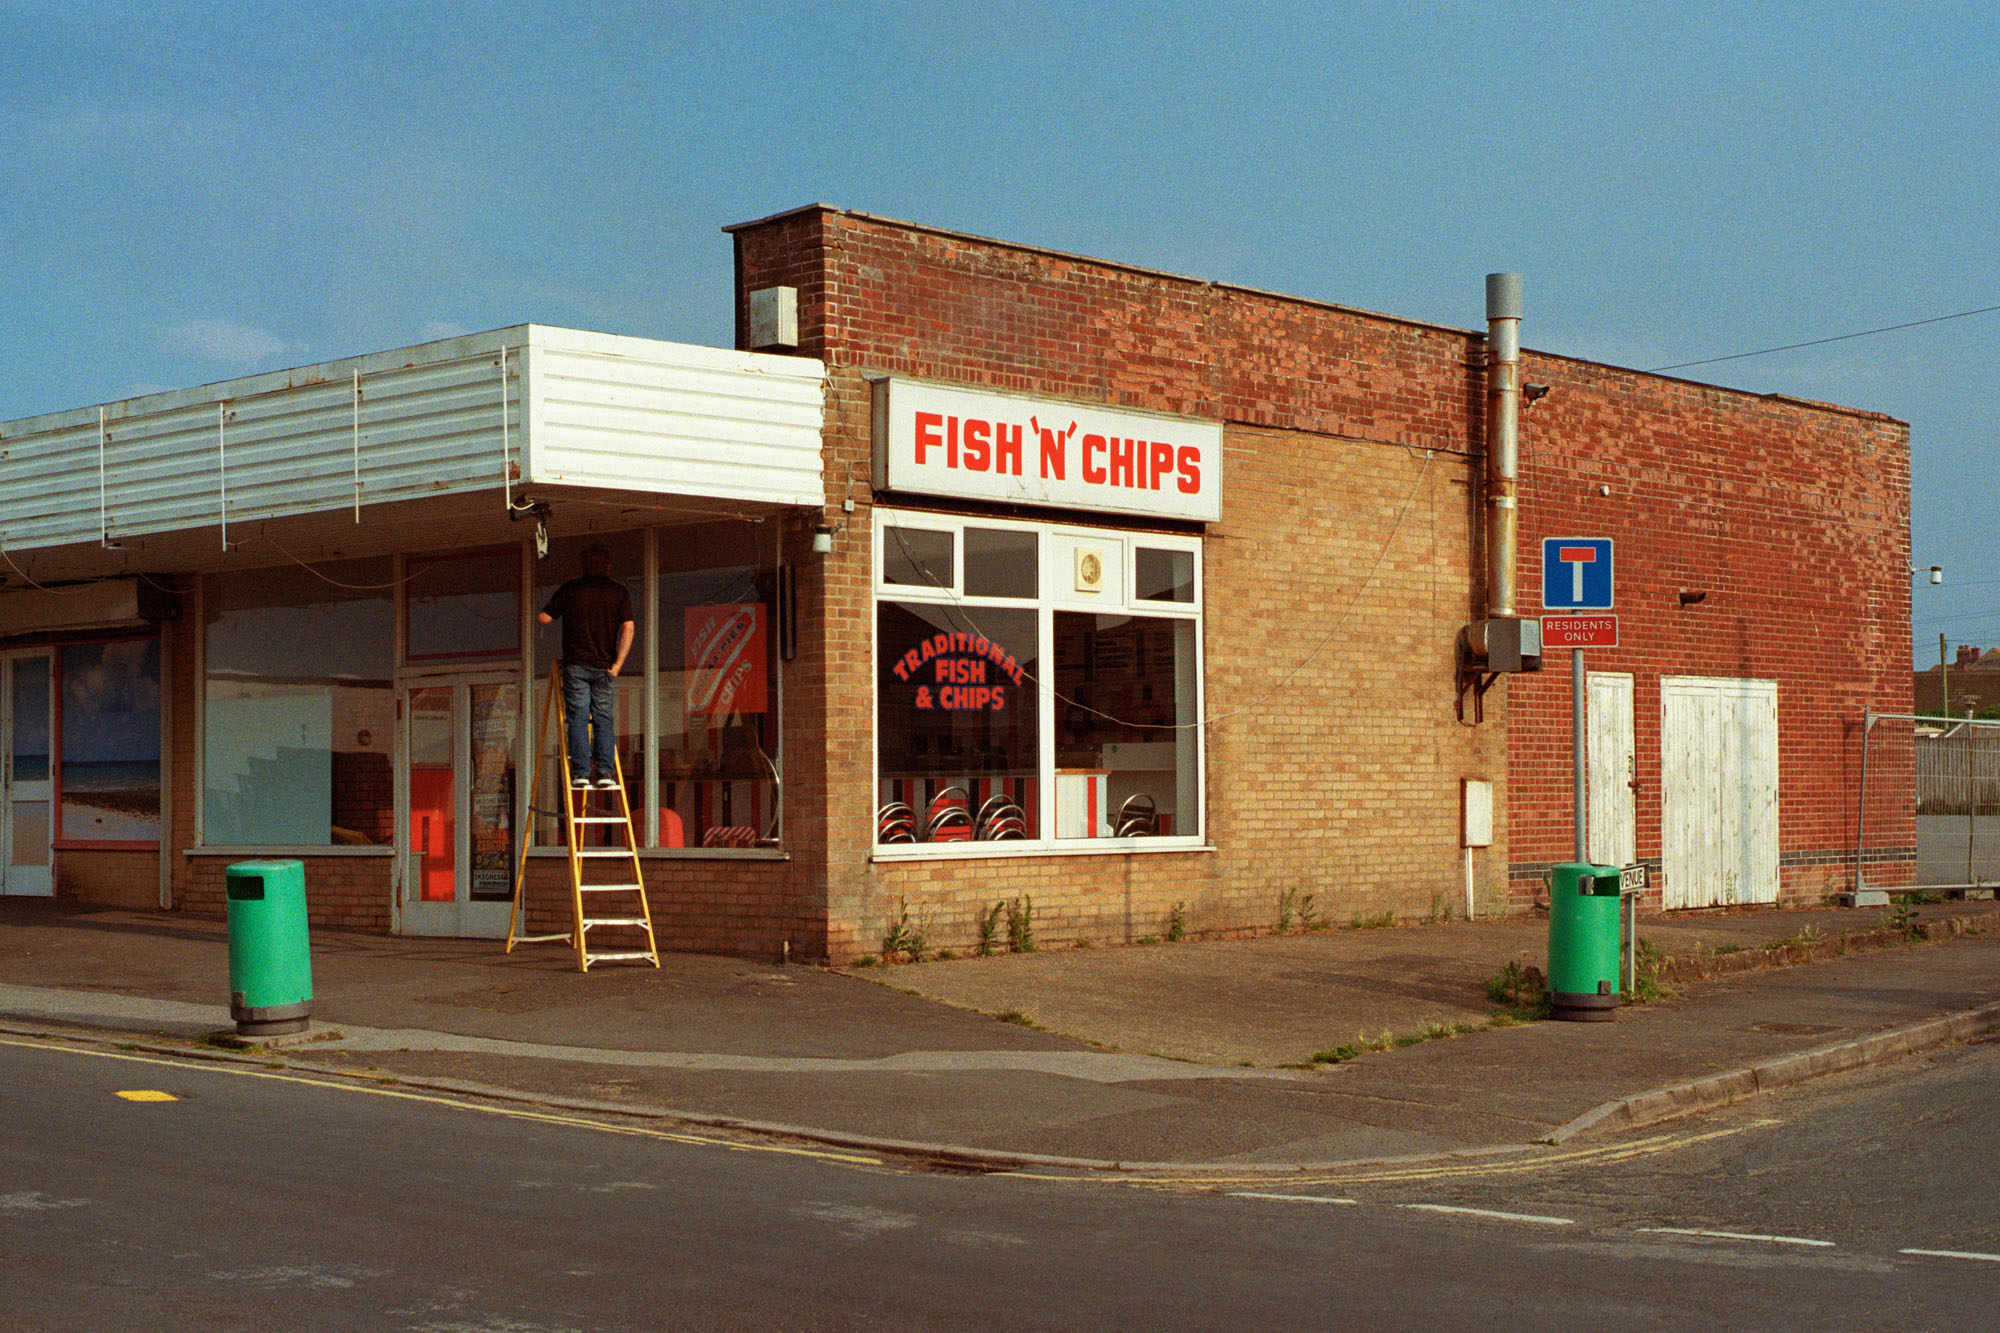 A colour photo a single-storey commercial building on the corner of two streets. The building is faced in brick, The front includes a deep overhang. A sign above a large window reads: 'Fish 'N' Chips'. A person on a step ladder works beneath the overhang. On the pavements to the front and side of the shop are green rubbish bins.
